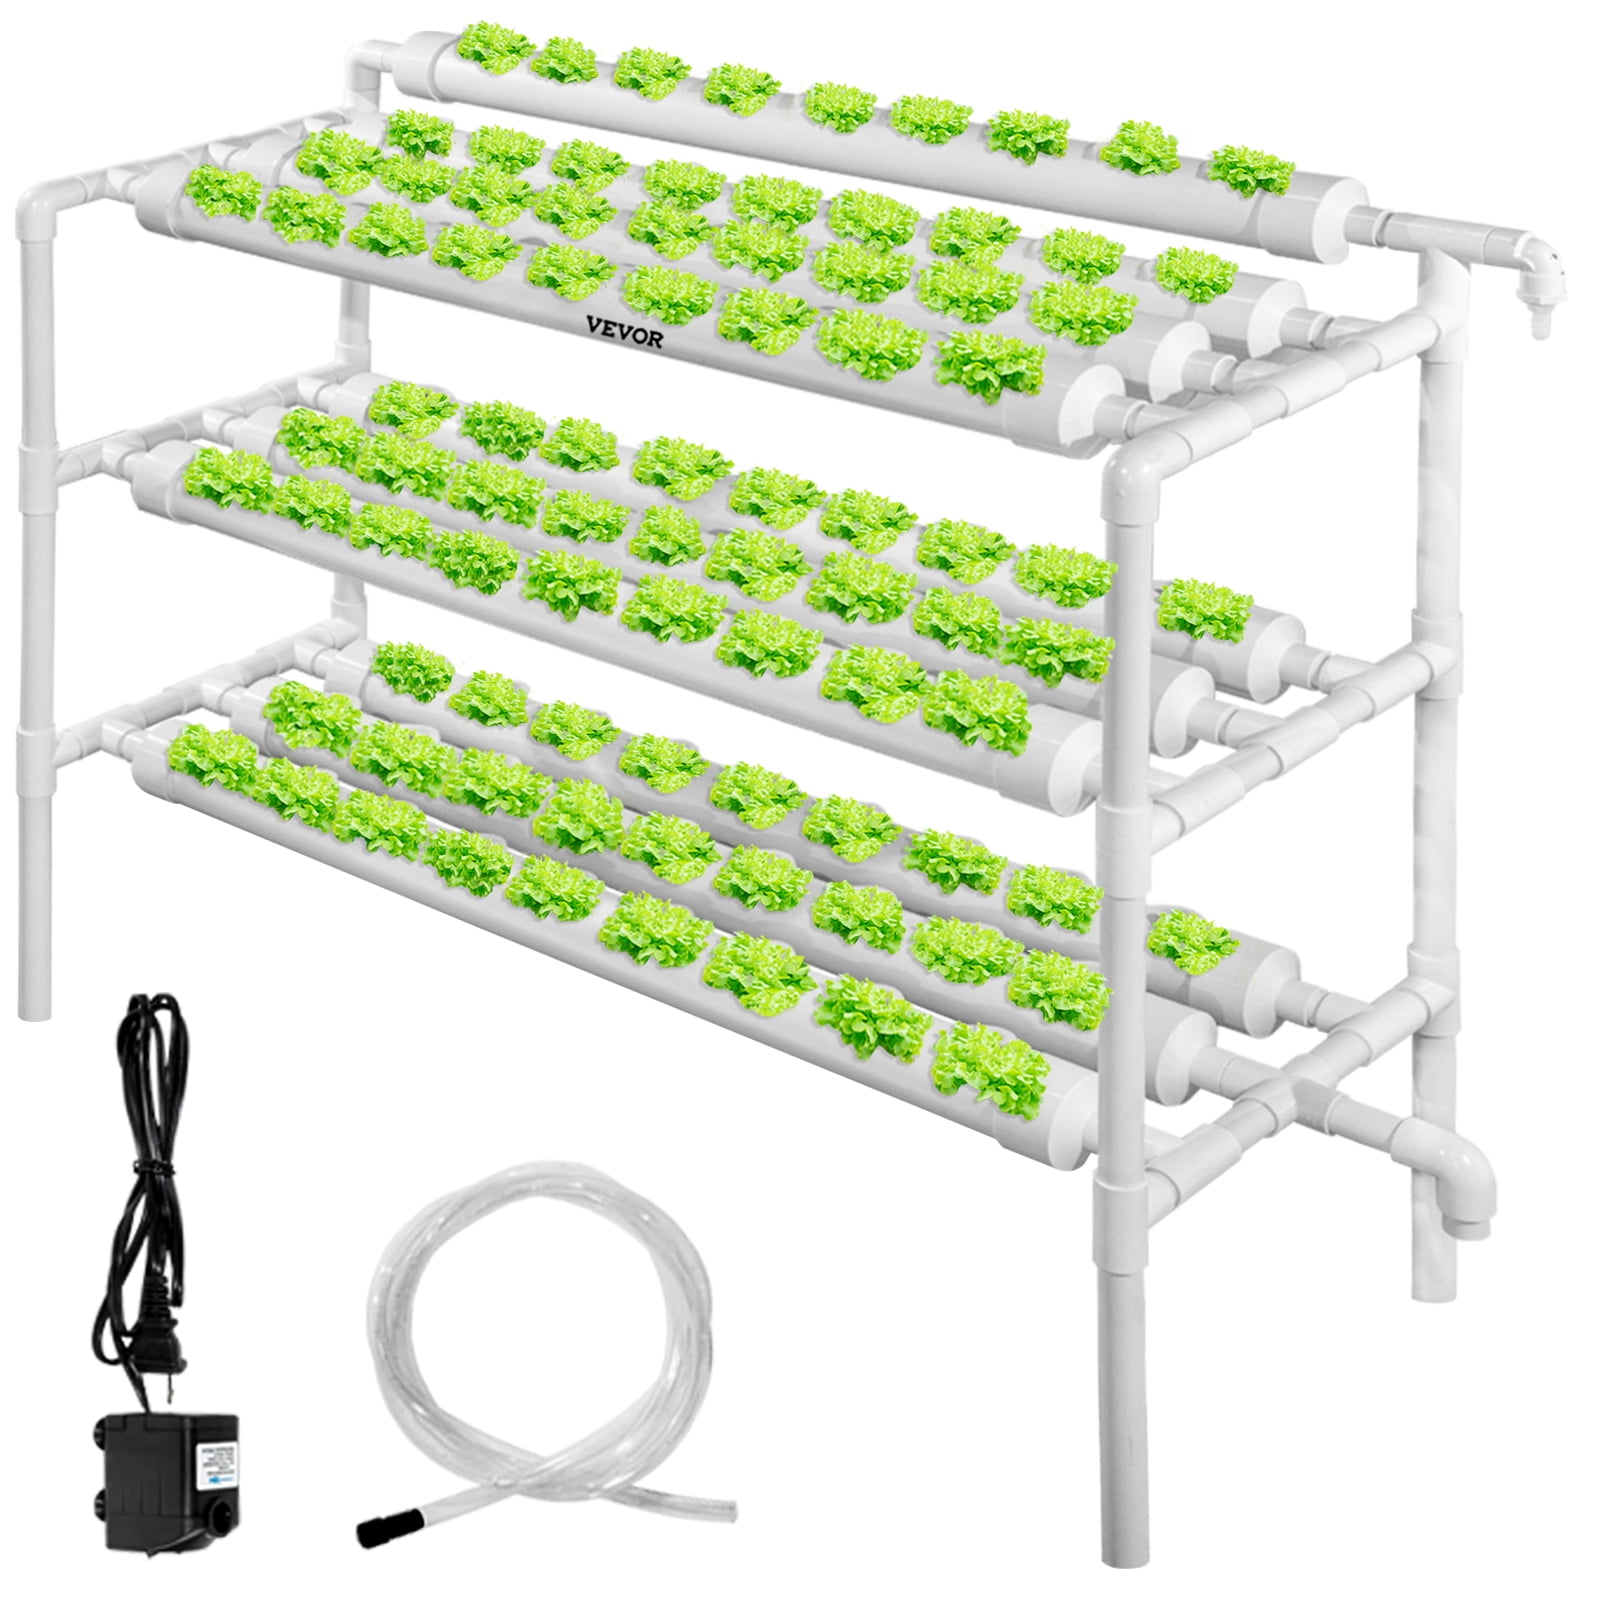 DreamJoy Hydroponic Grow Kit 90 Sites 10 Pipe NFT PVC Hydroponic Pipe Home Balcony Garden Grow Kit Hydroponic Soilless Plant Growing Systems Vegetable Planting Grow Kit 90Site 10Pipe 